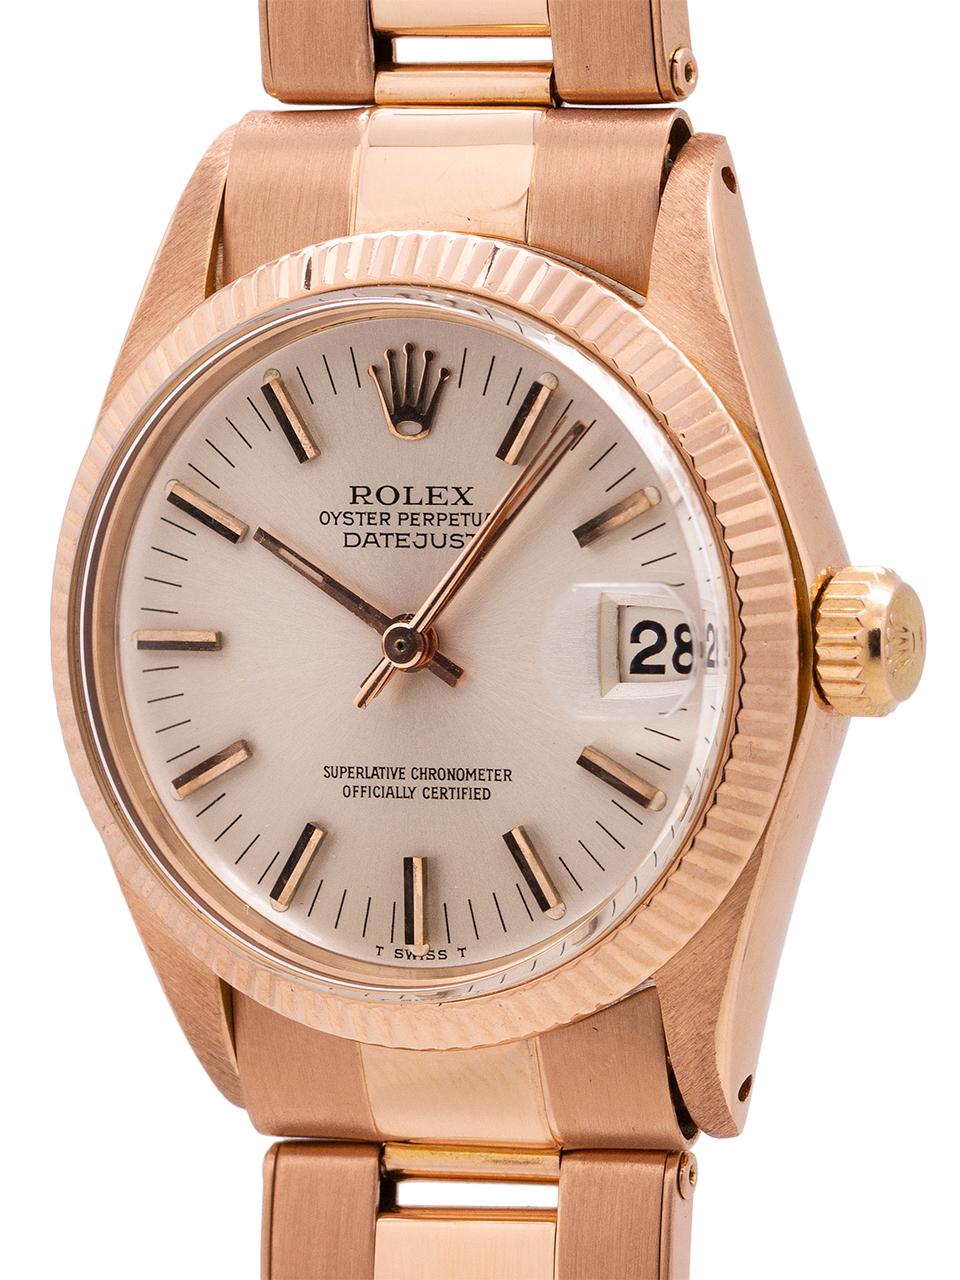 
 Rolex midsize Datejust 18K pink gold ref 6827 case serial # 6.7 million circa 1973. Featuring 31mm diameter case with fluted bezel, acrylic crystal and original silver satin dial with applied rose indexes and rose baton hands. Powered by self